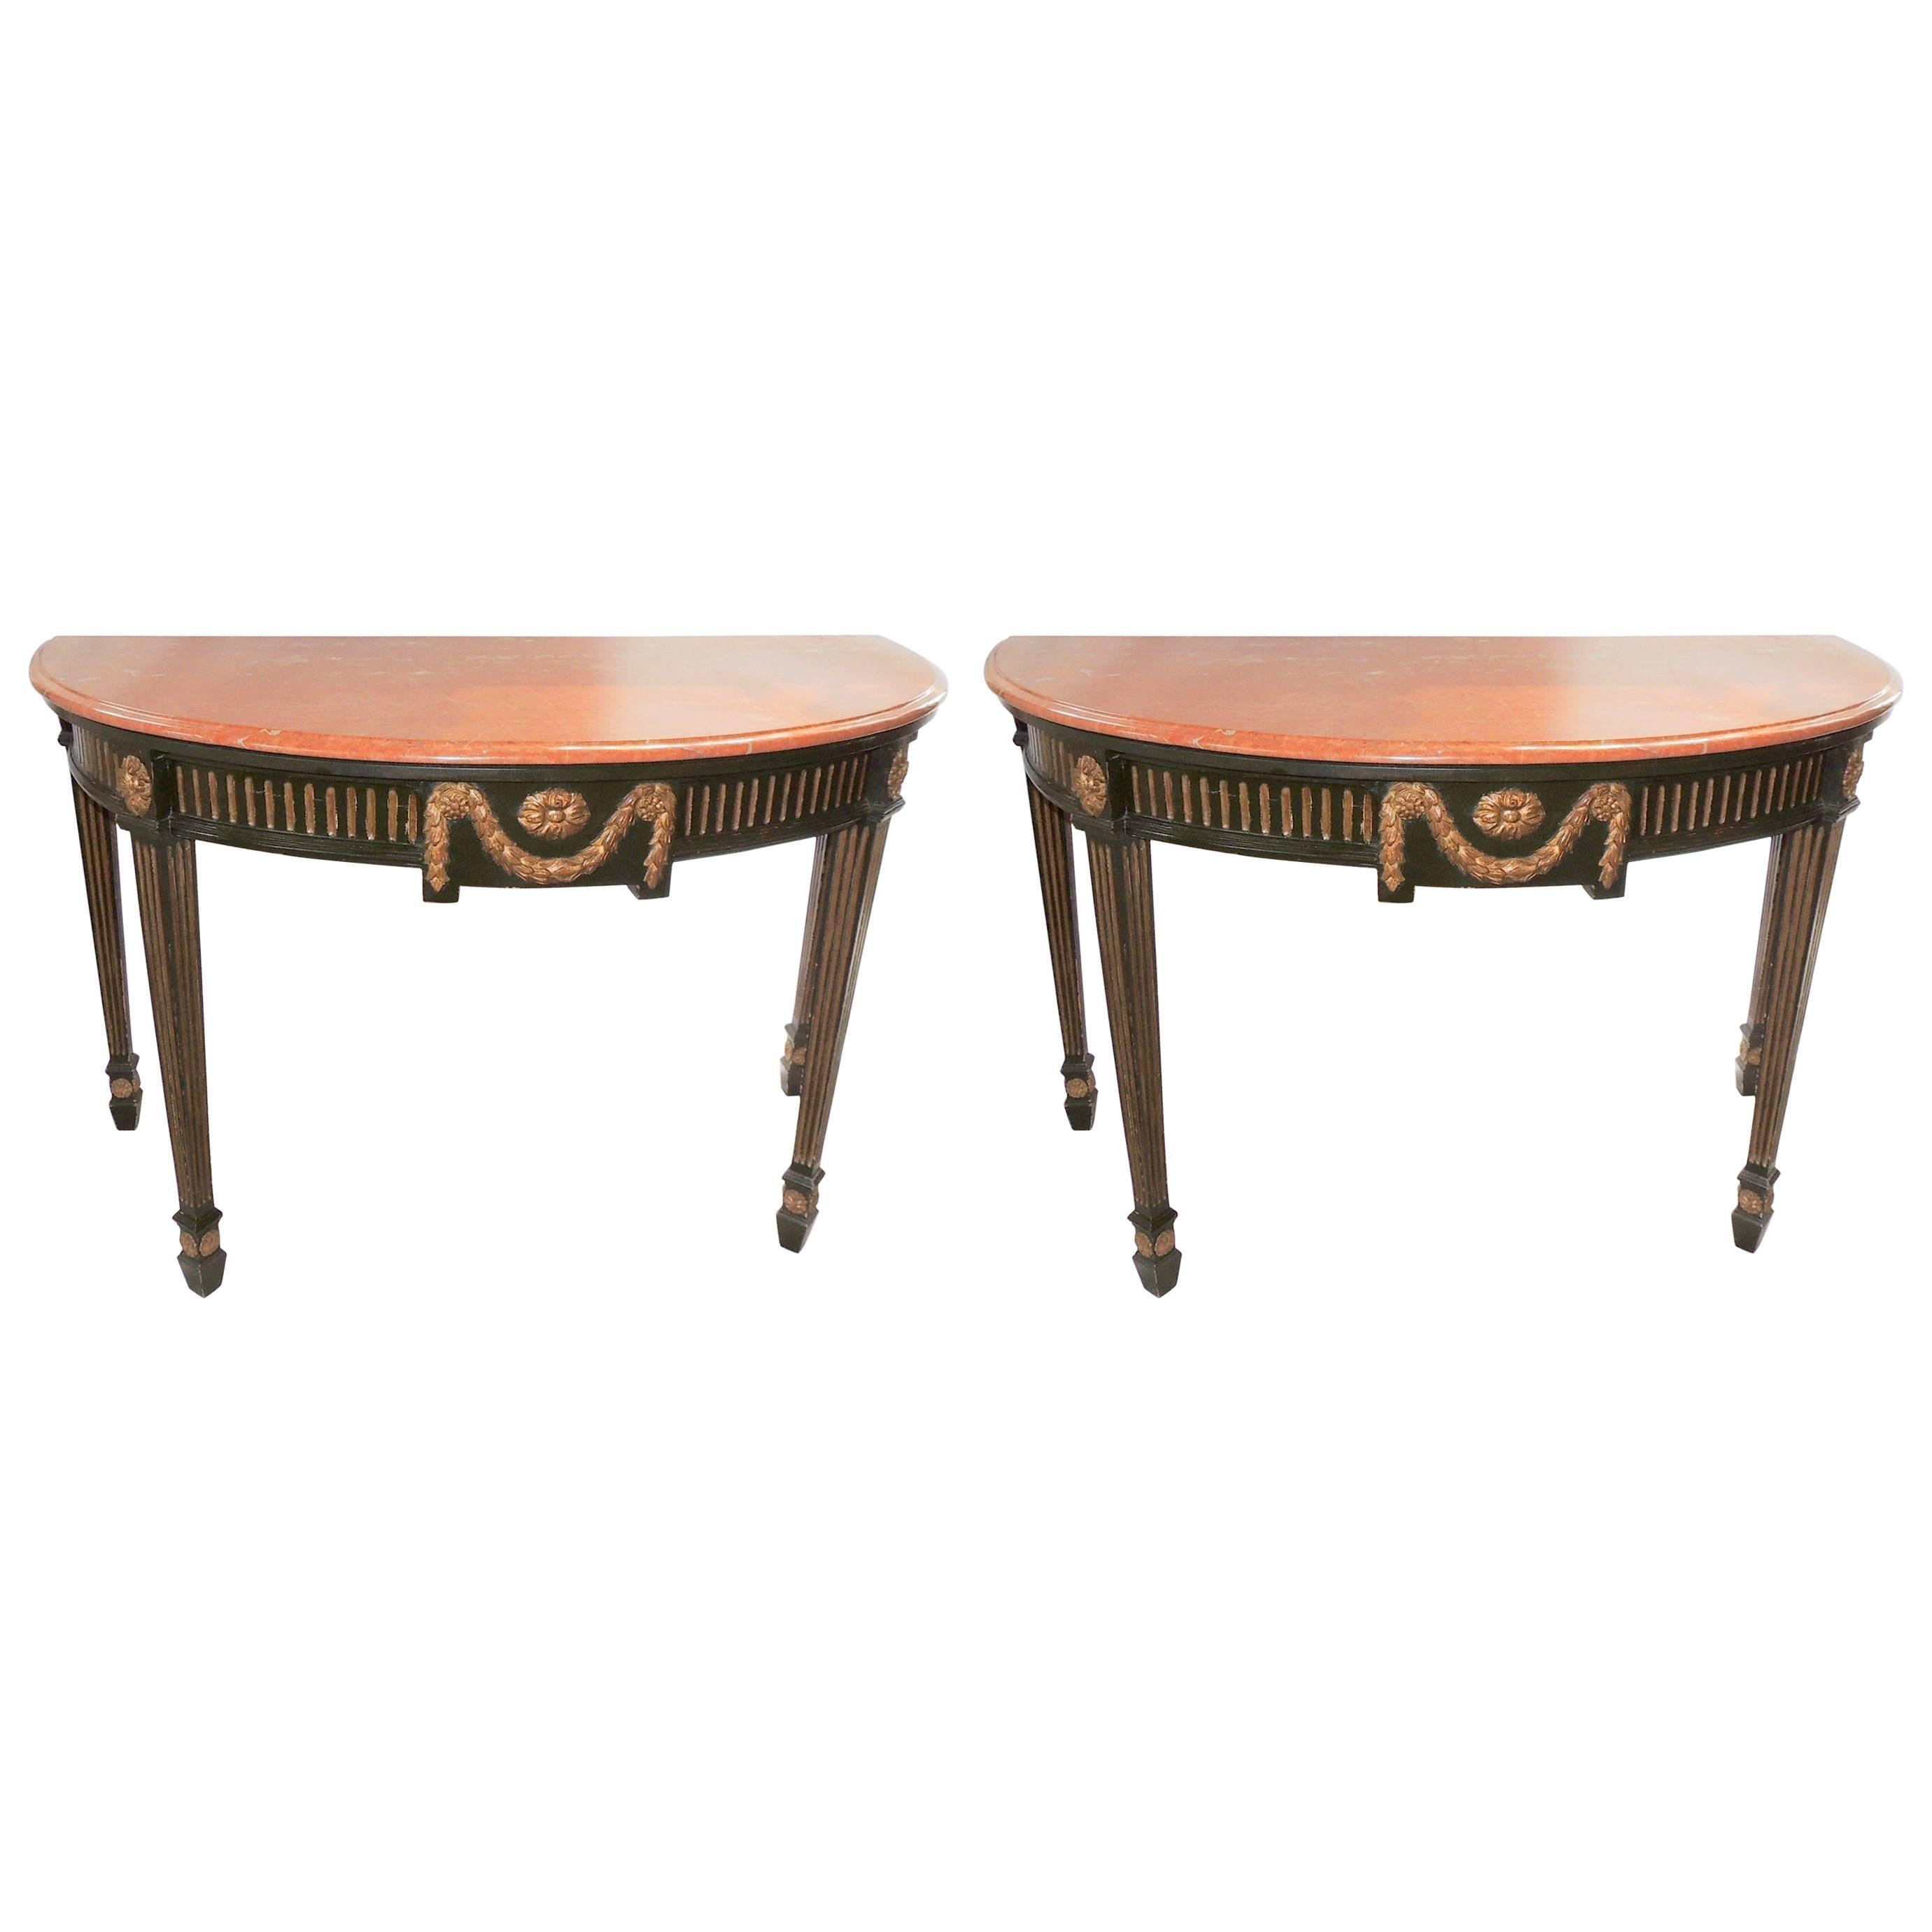 Wonderful French Pair Regency Marble-Top Green Gold Gilt Demilune Console Tables